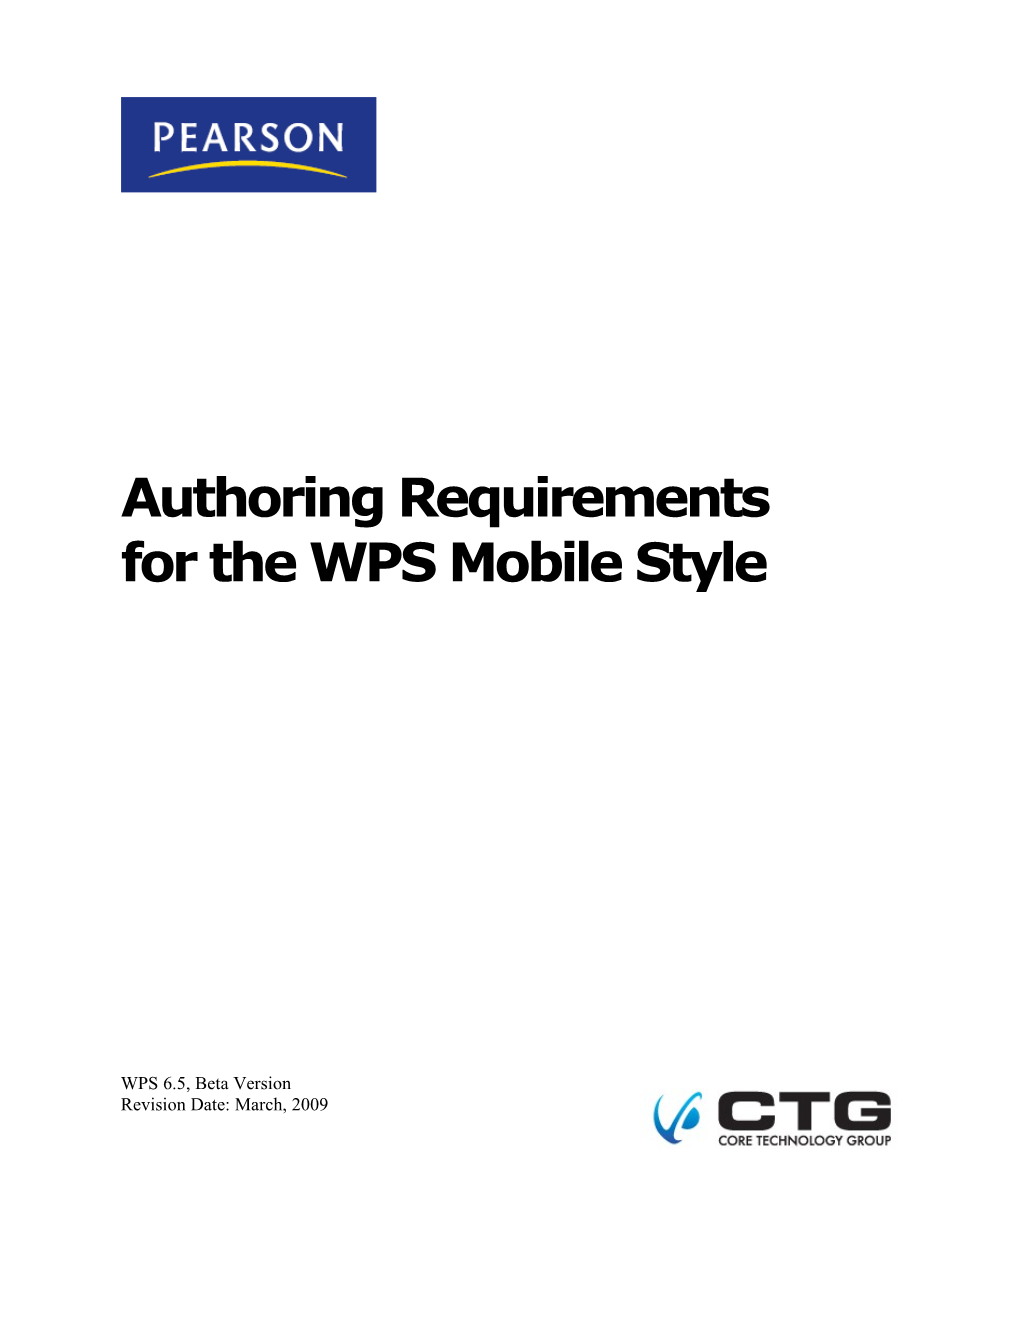 Authoring Requirements for the WPS Mobile Style